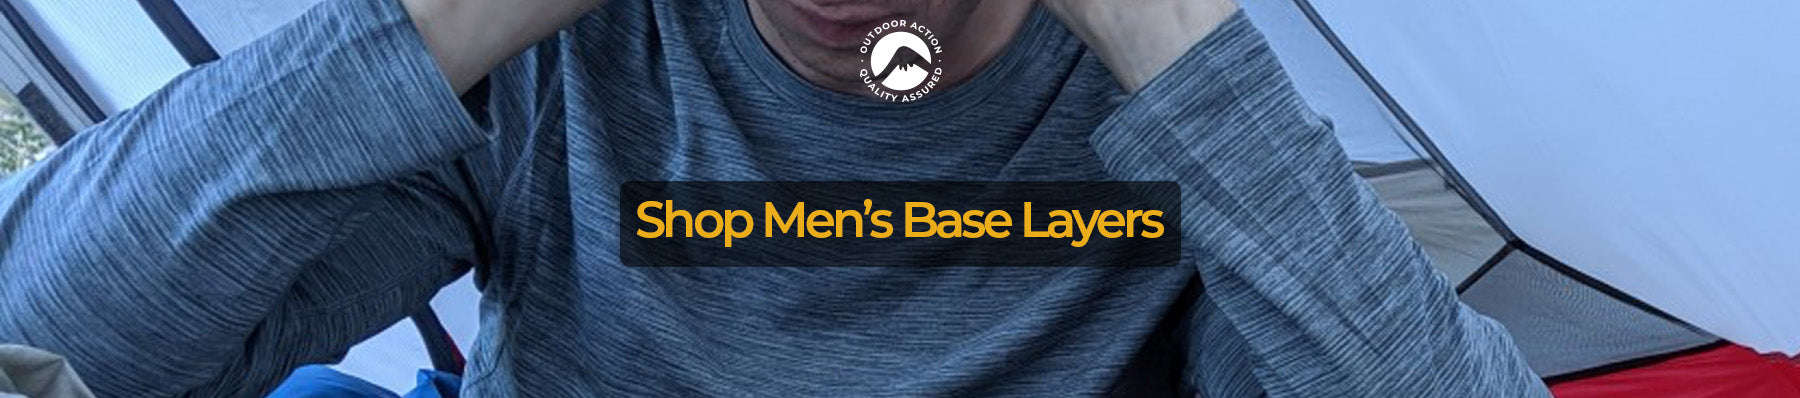 Shop Men's Base Layers online at Outdoor Action